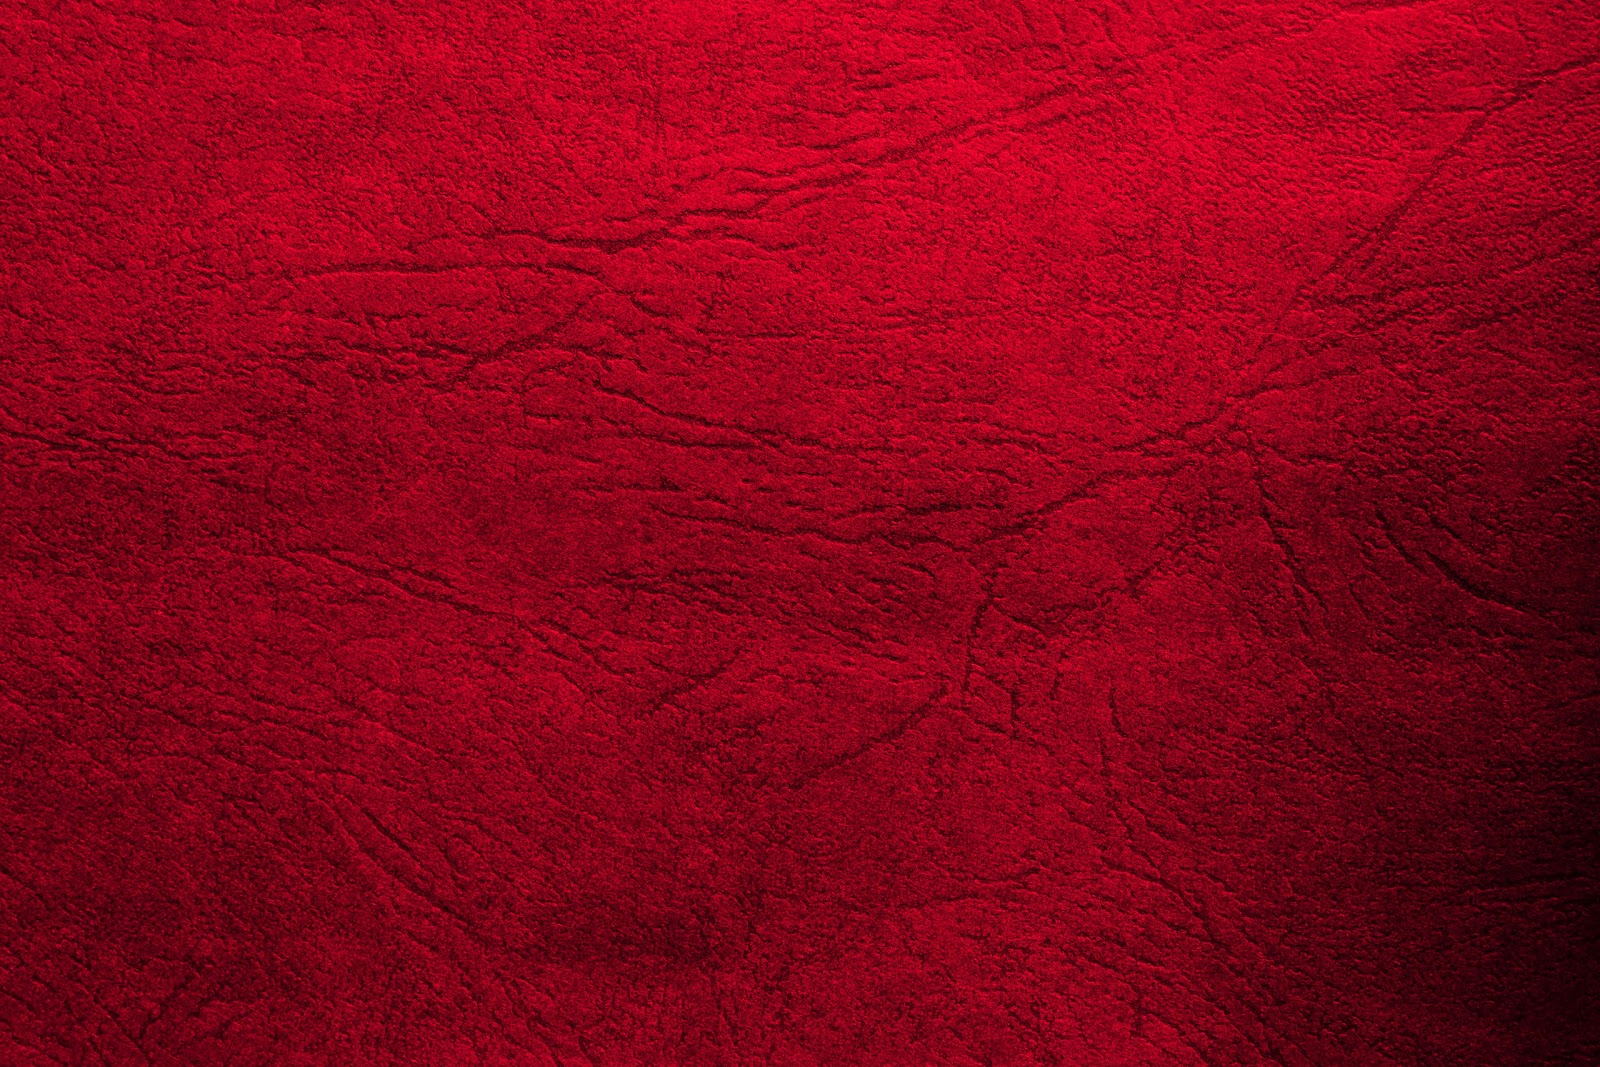 Light Red Background HD Red Aesthetic Wallpapers | HD Wallpapers | ID #56027